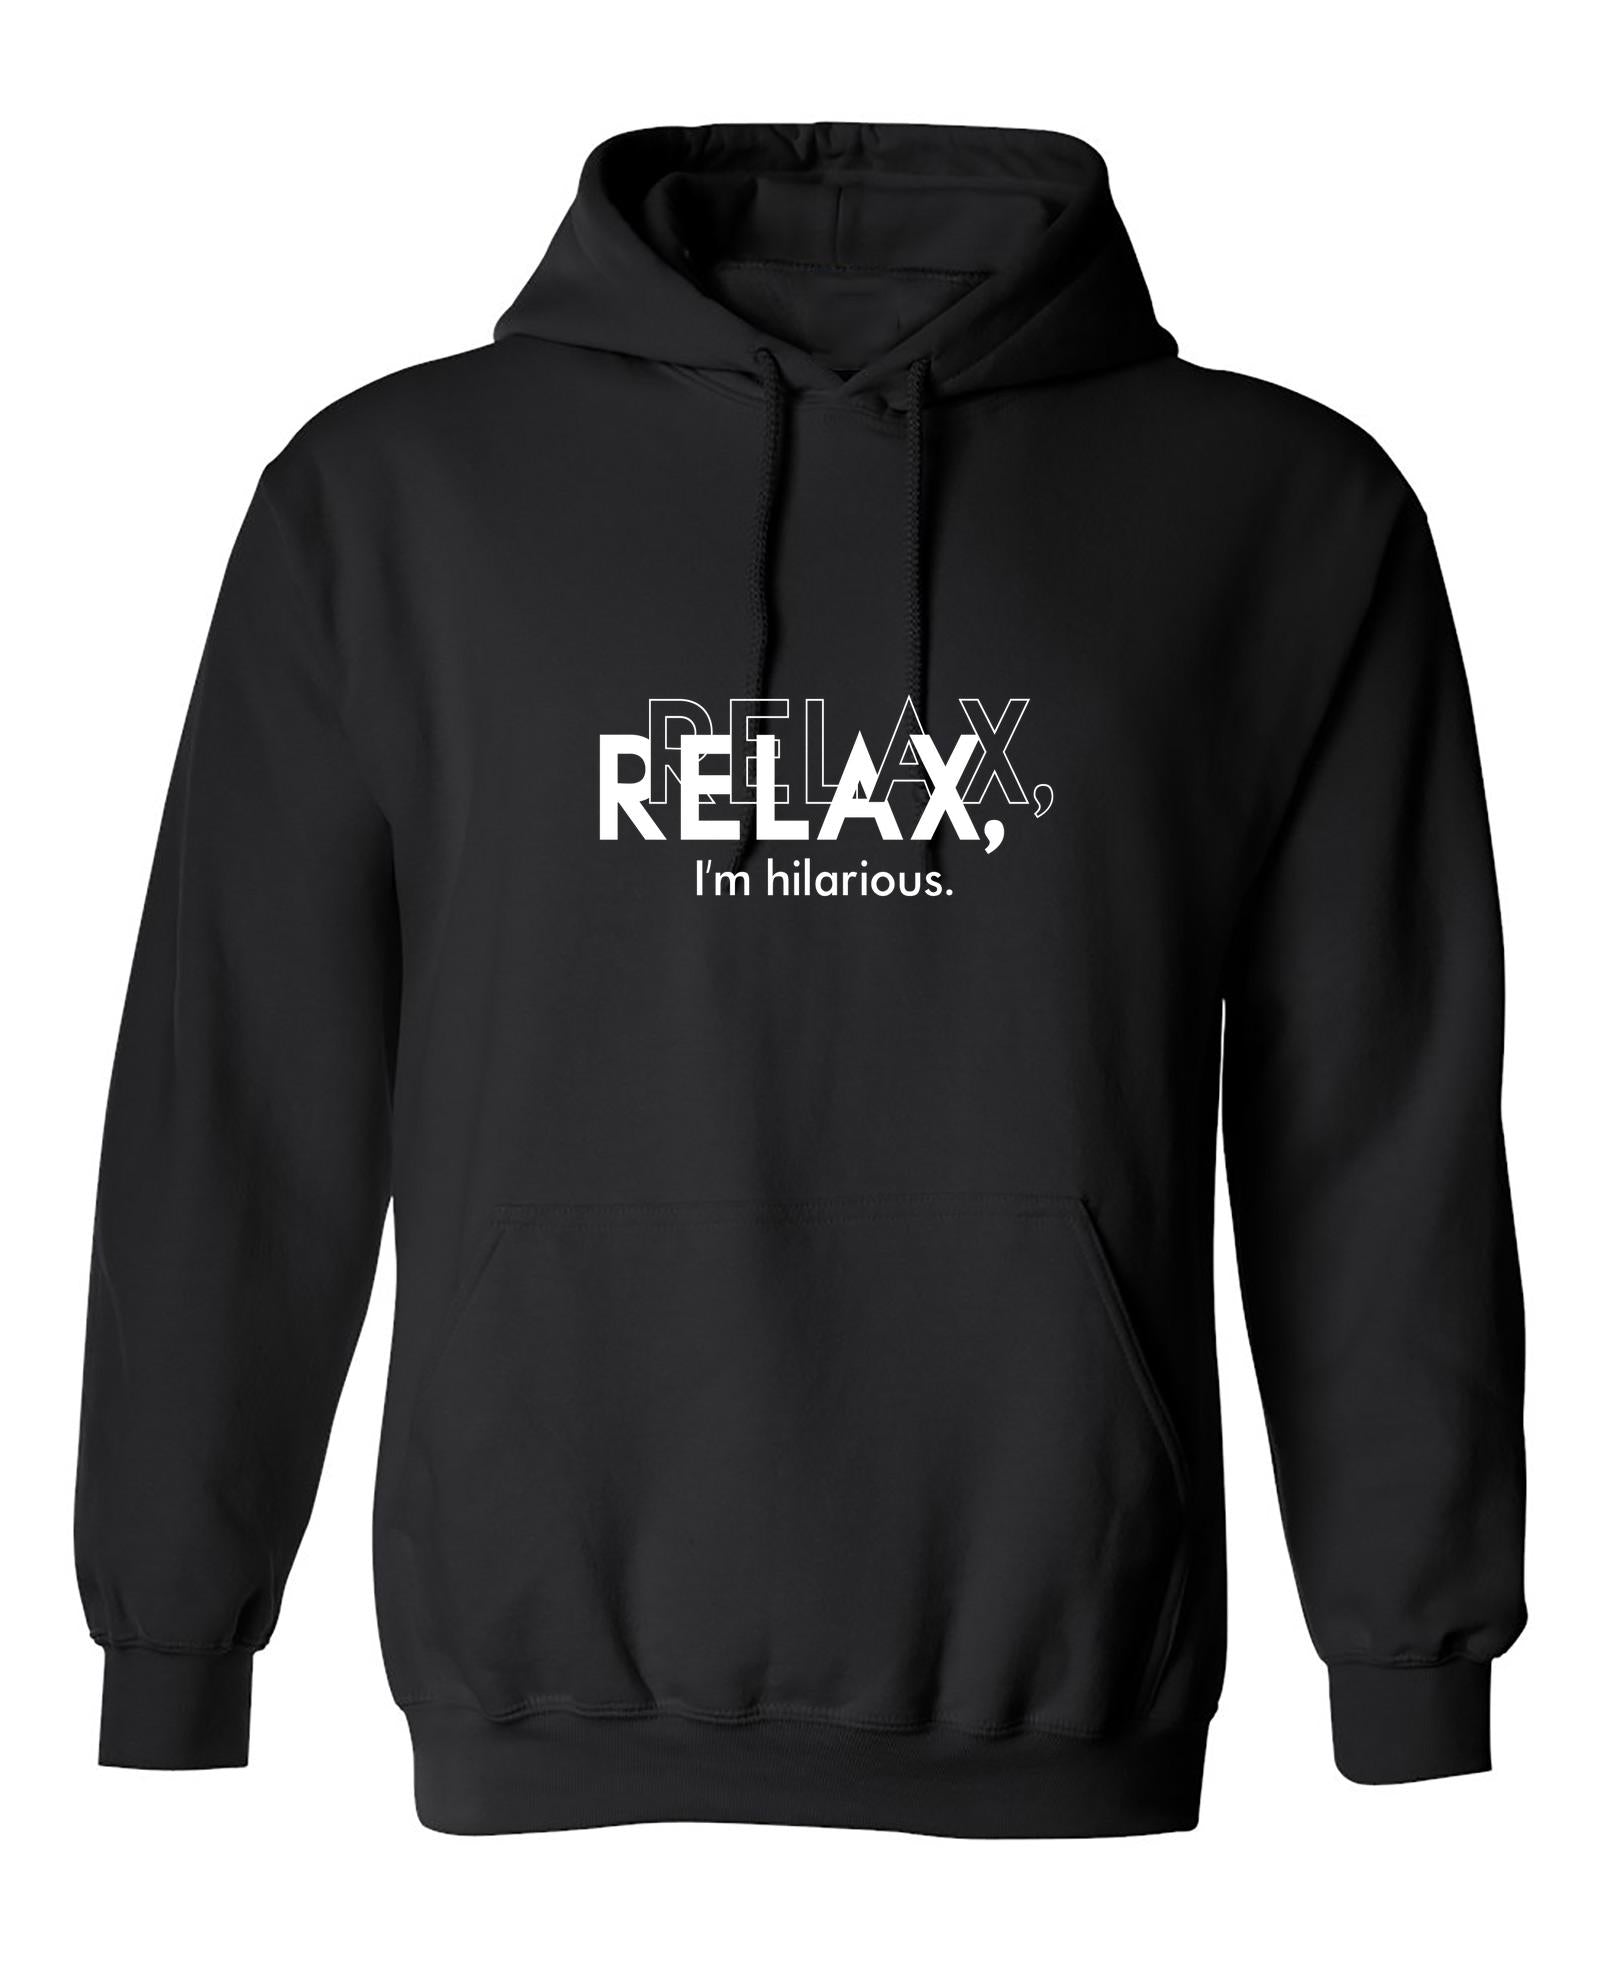 Funny T-Shirts design "RELAX HILARIOUS"